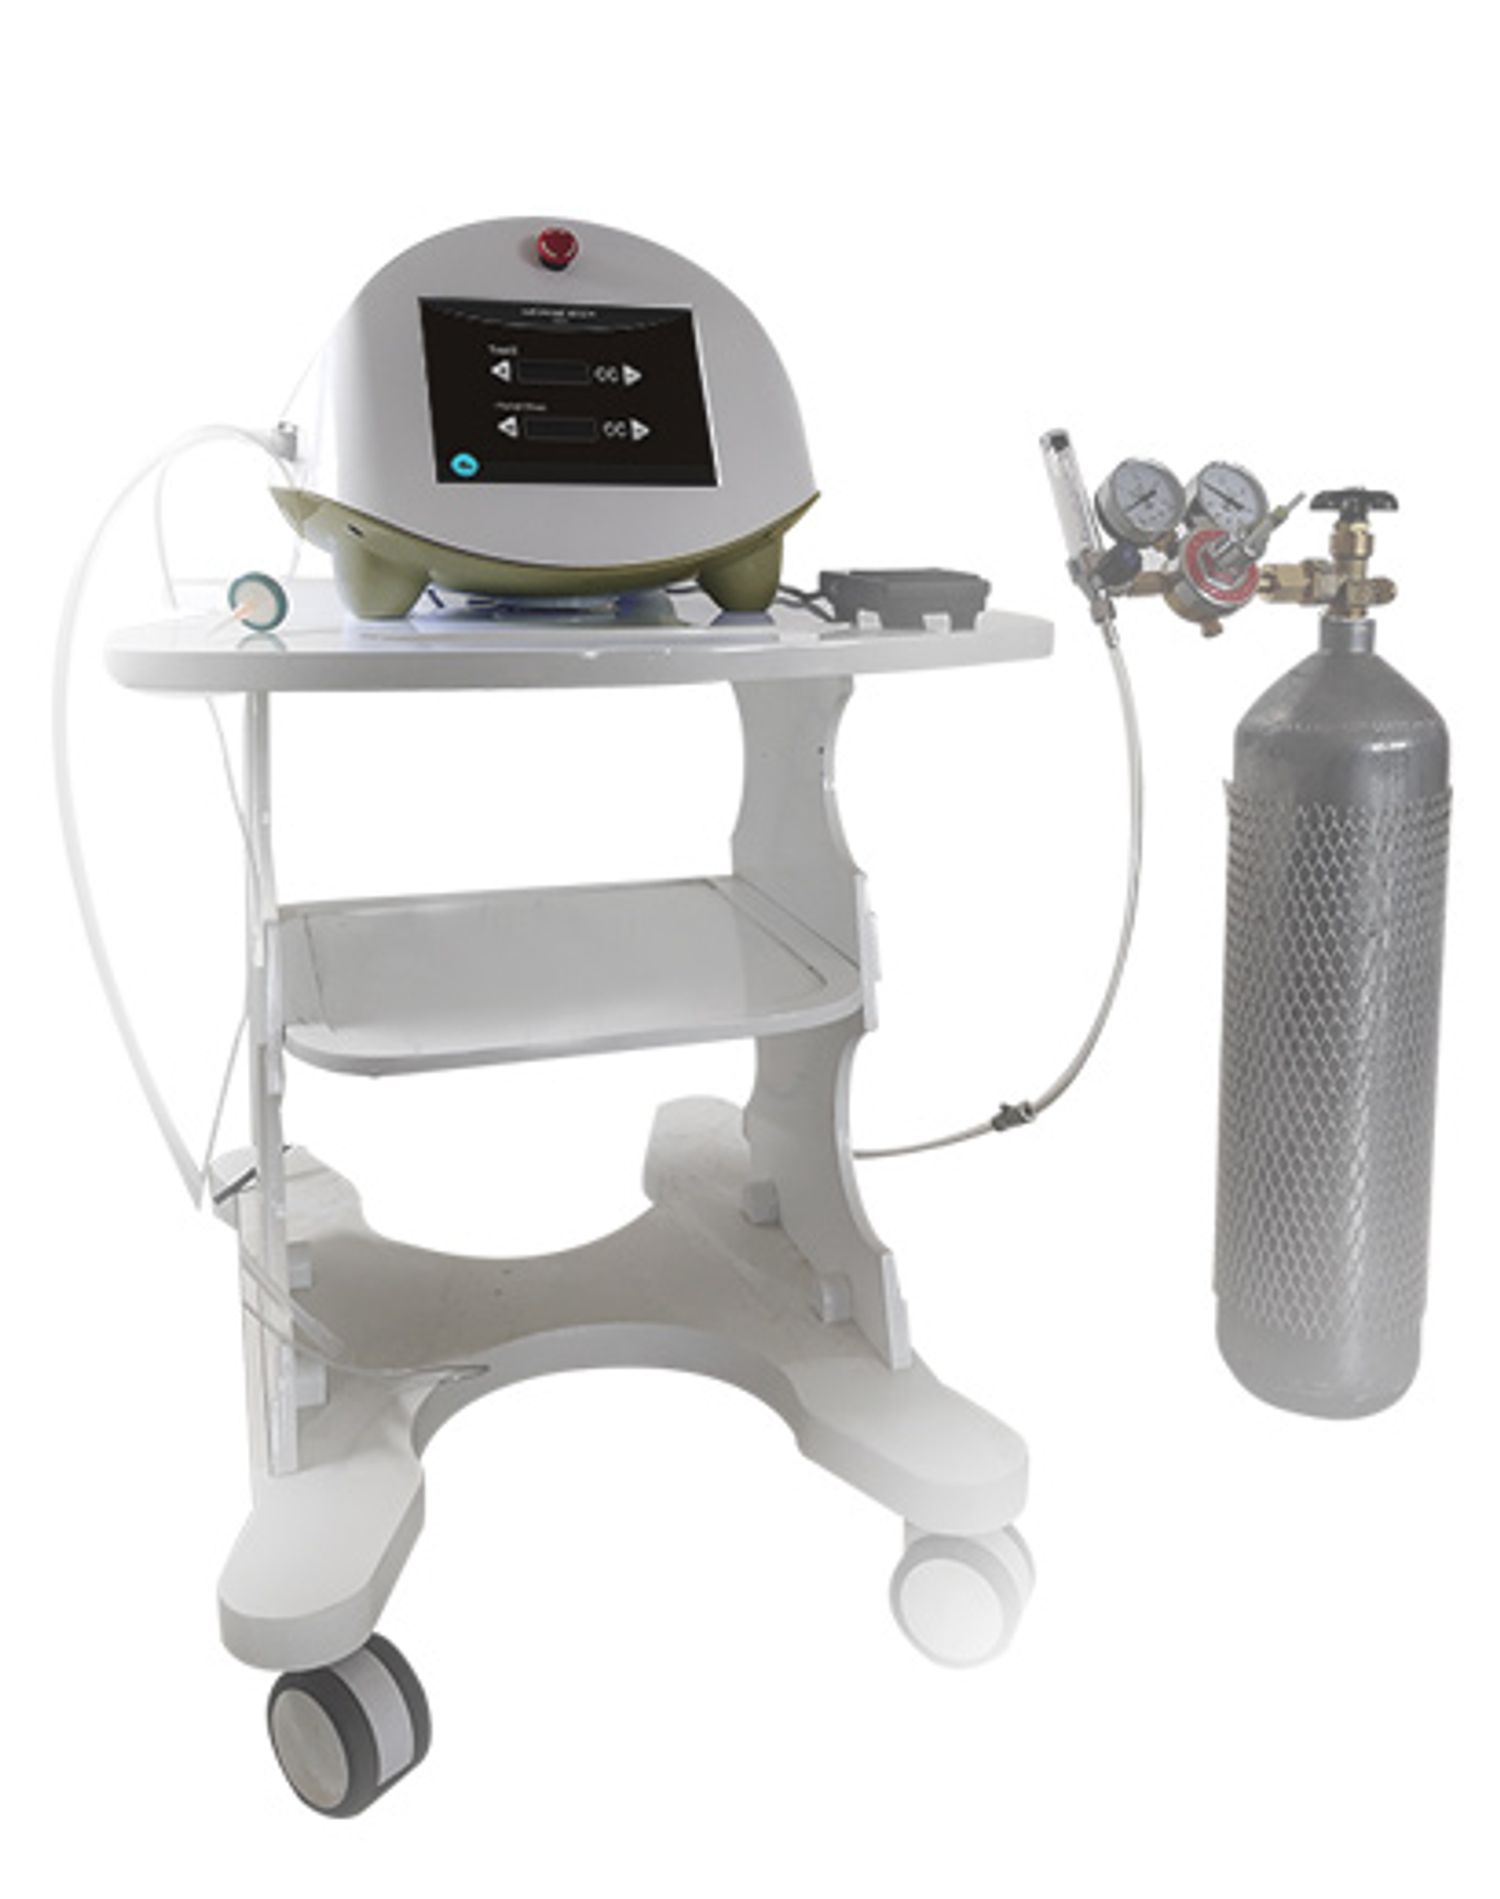 Full carbontherapy device for treatment